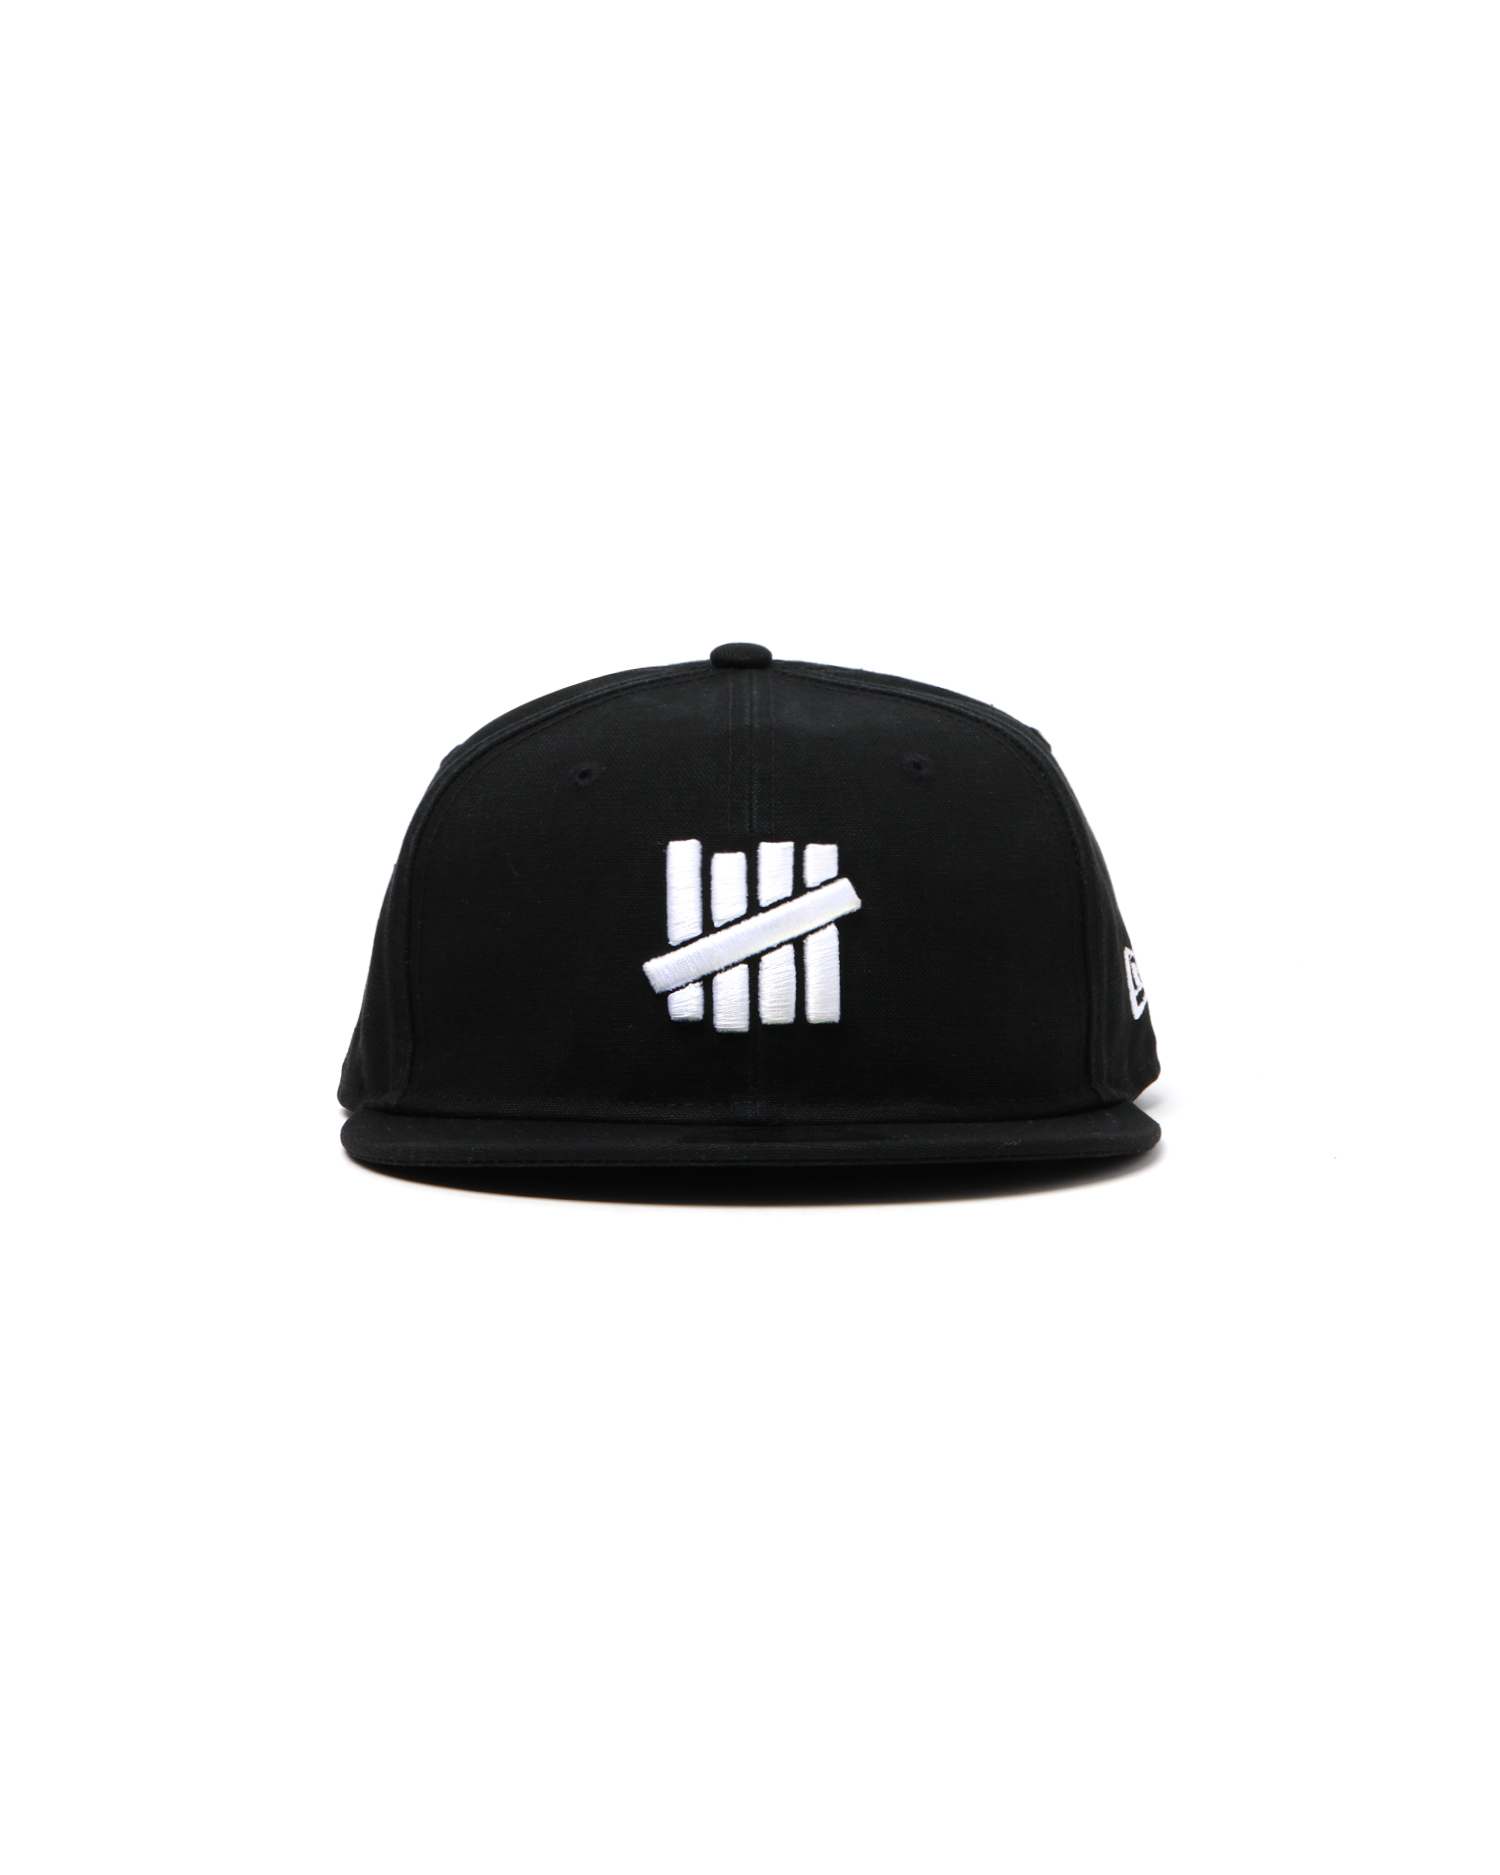 UNDEFEATED X NE stencil icon fitted cap | ITeSHOP